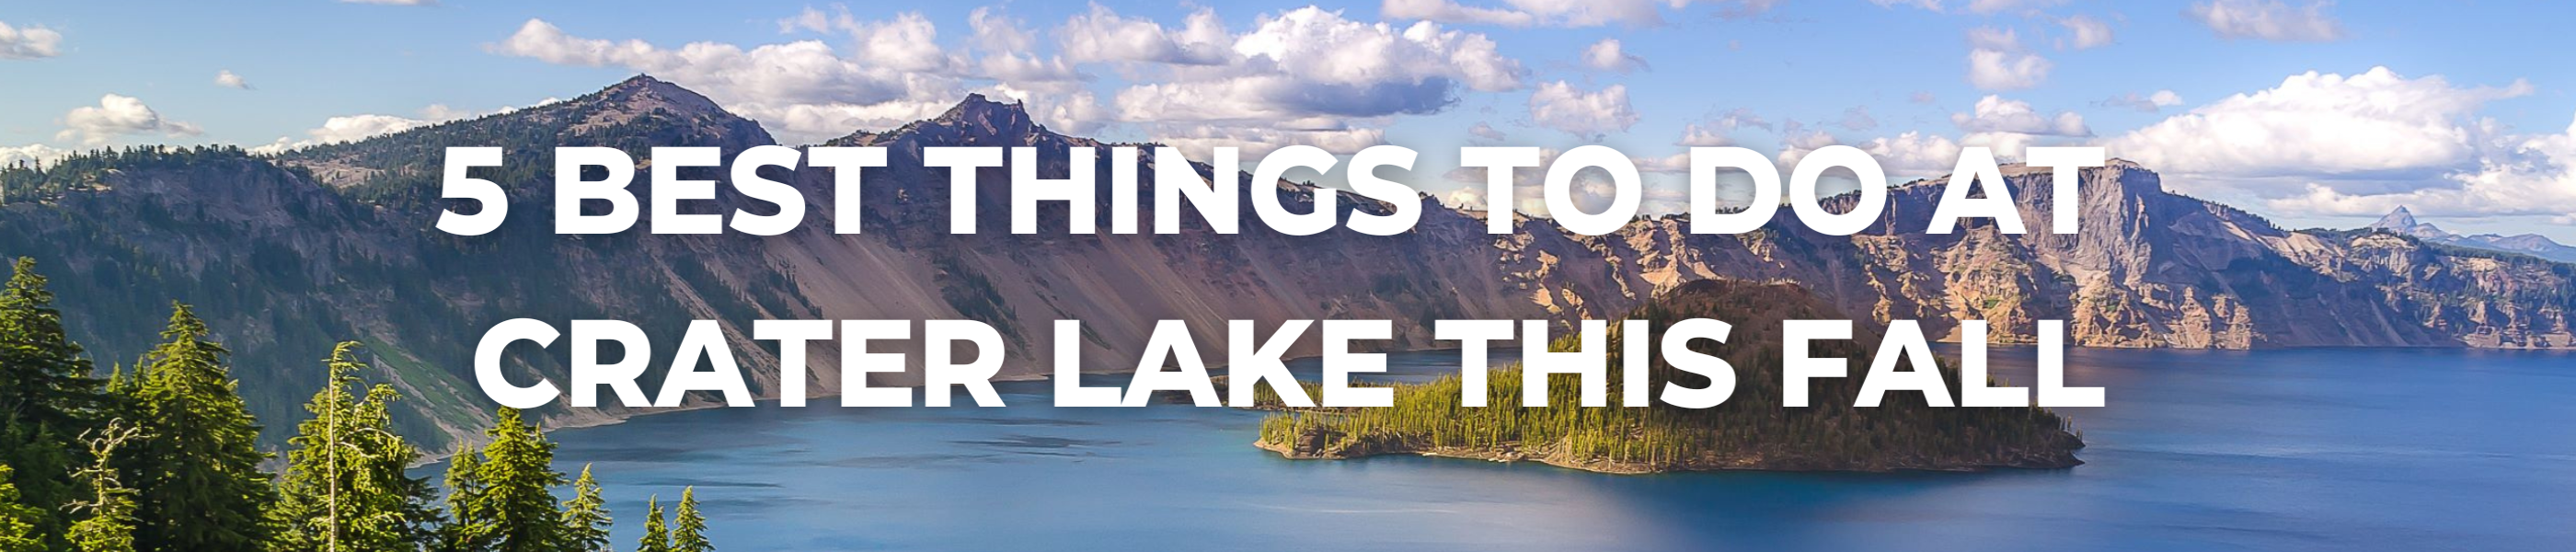 5 Best Things to do at Crater Lake this Fall